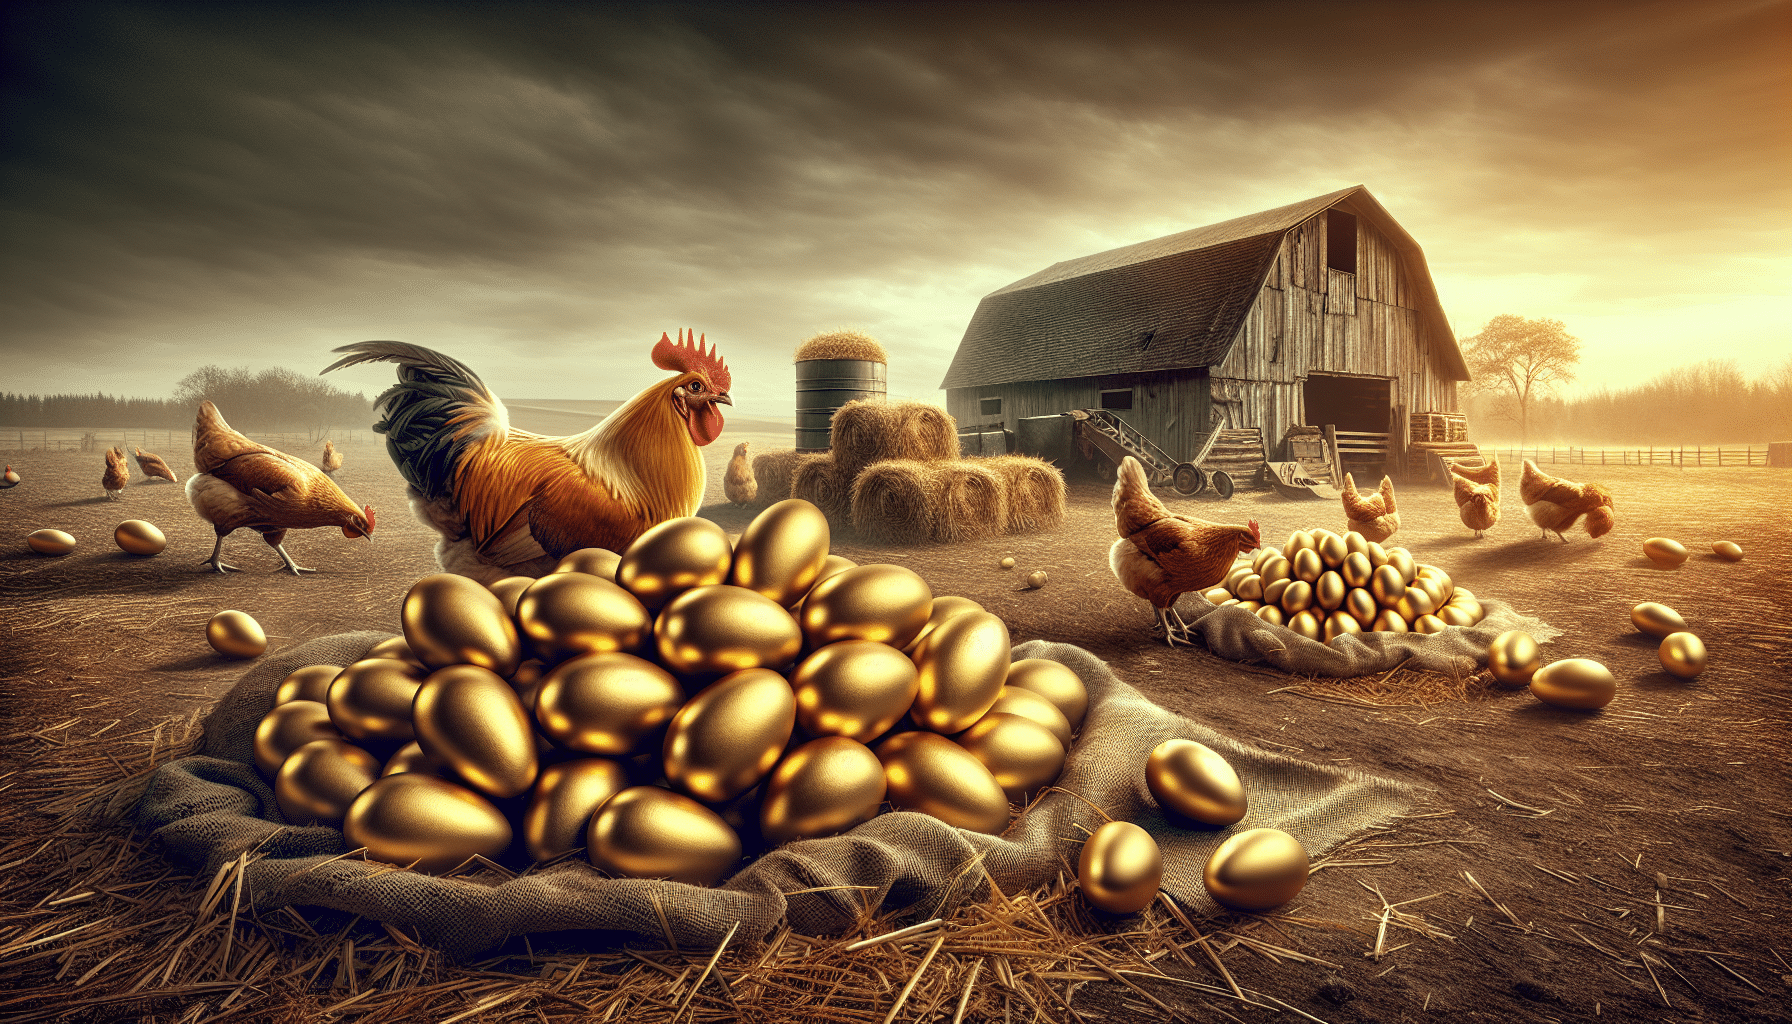 learn how to maximize your flock's egg production with expert tips and advice. become a poultry prodigy and produce golden eggs with ease.